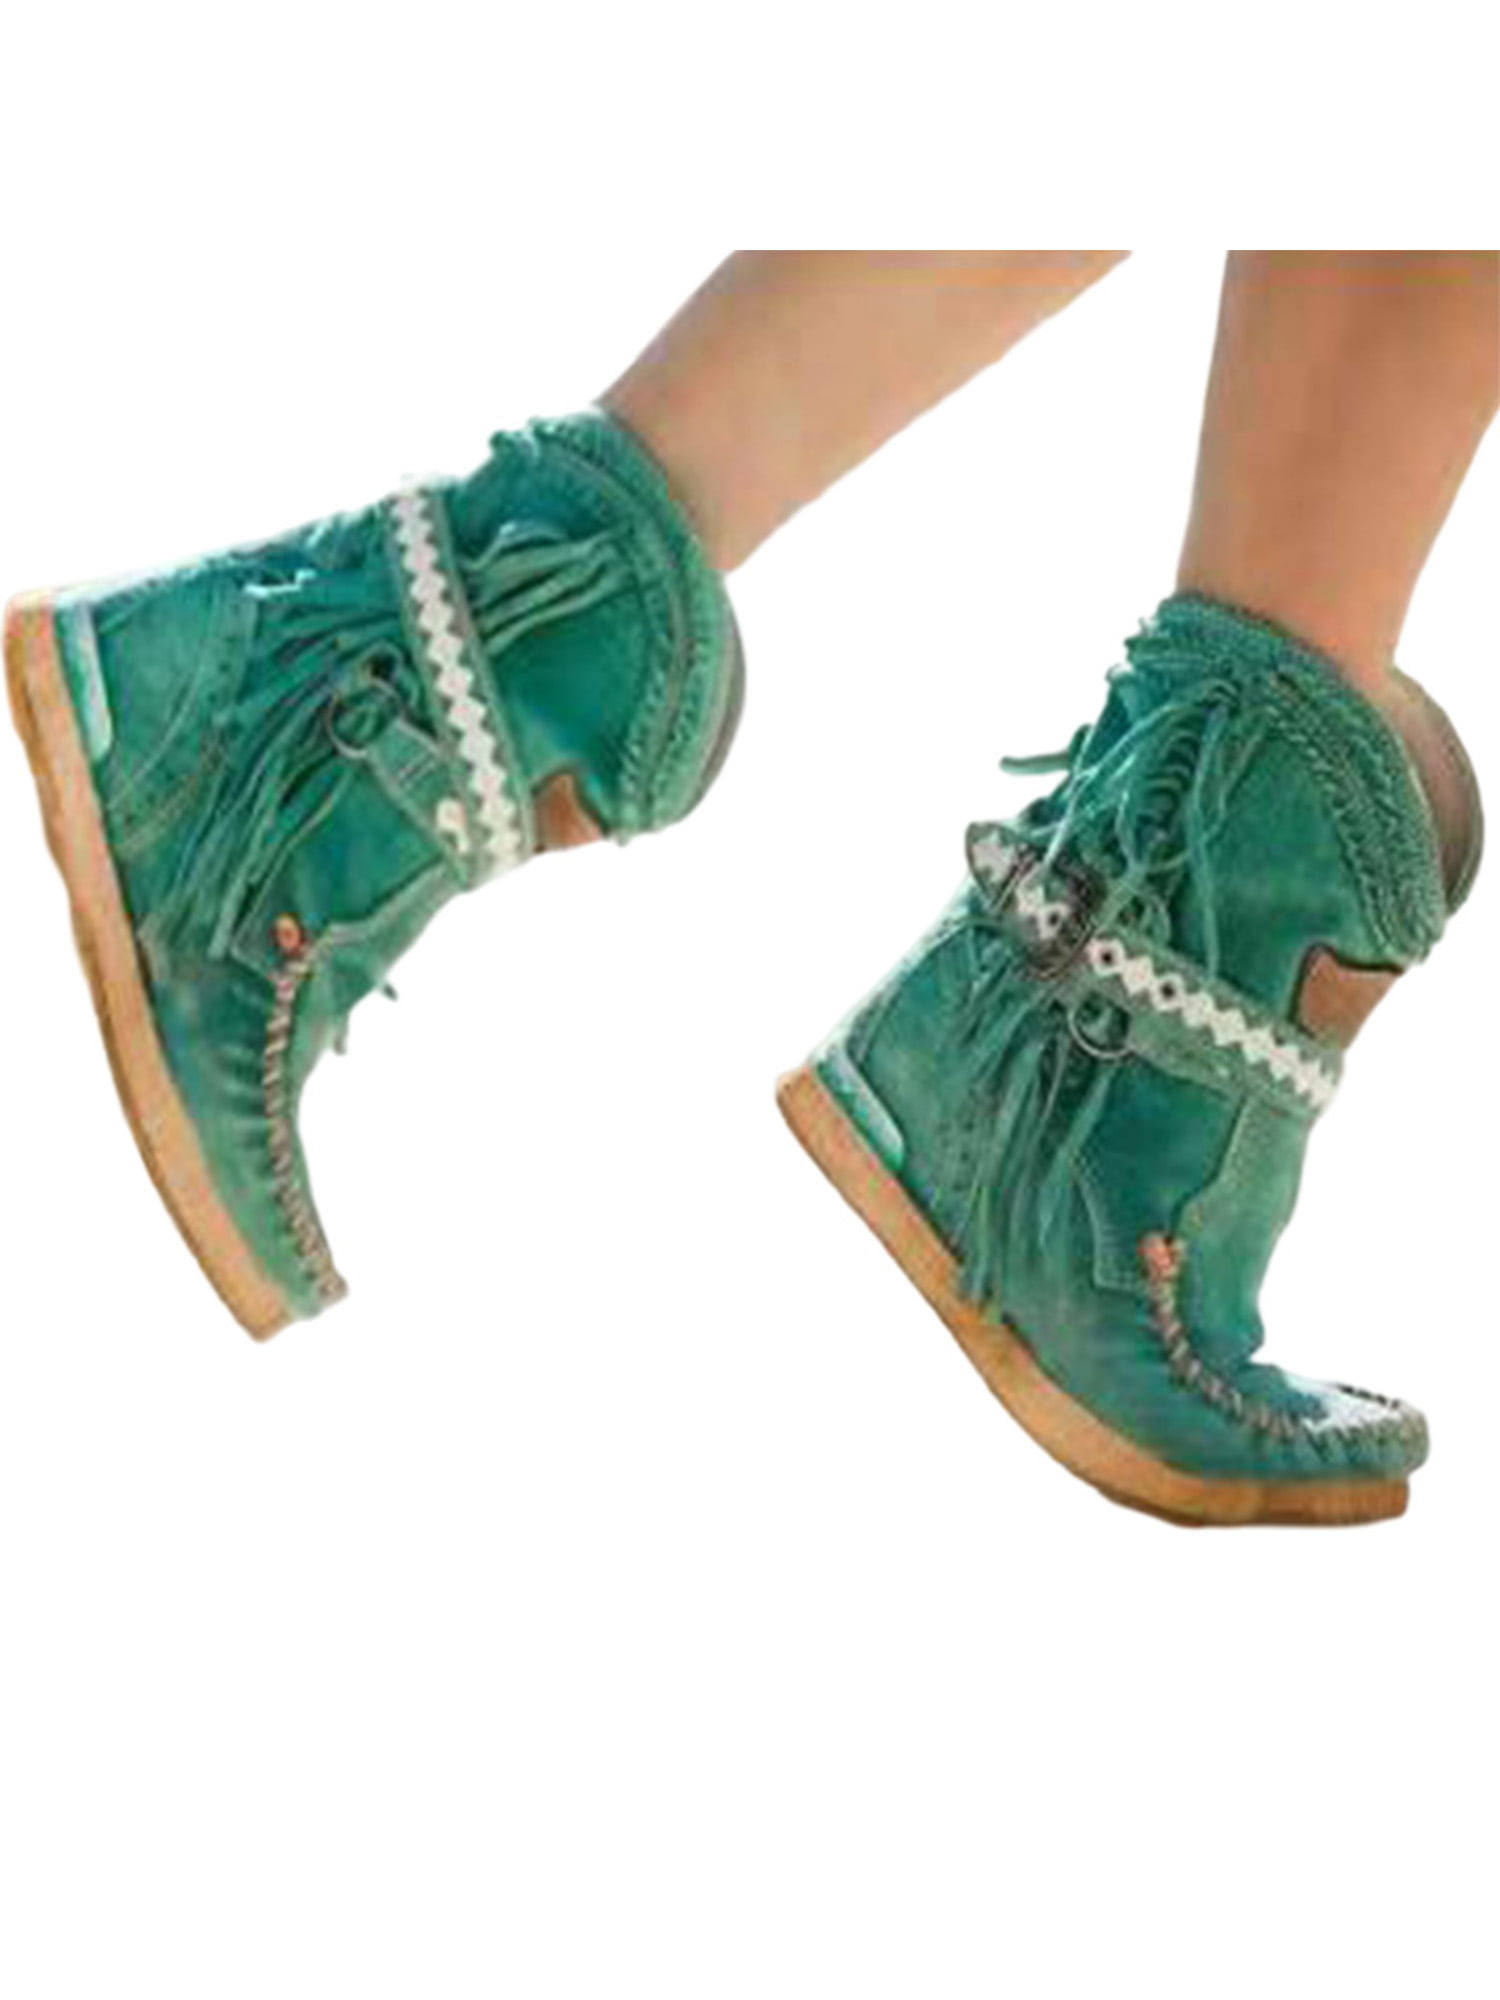 Womens Retro Tassel Fringe Ankle Boots Ladies Casual Flat Round Toe Slouch Shoes 